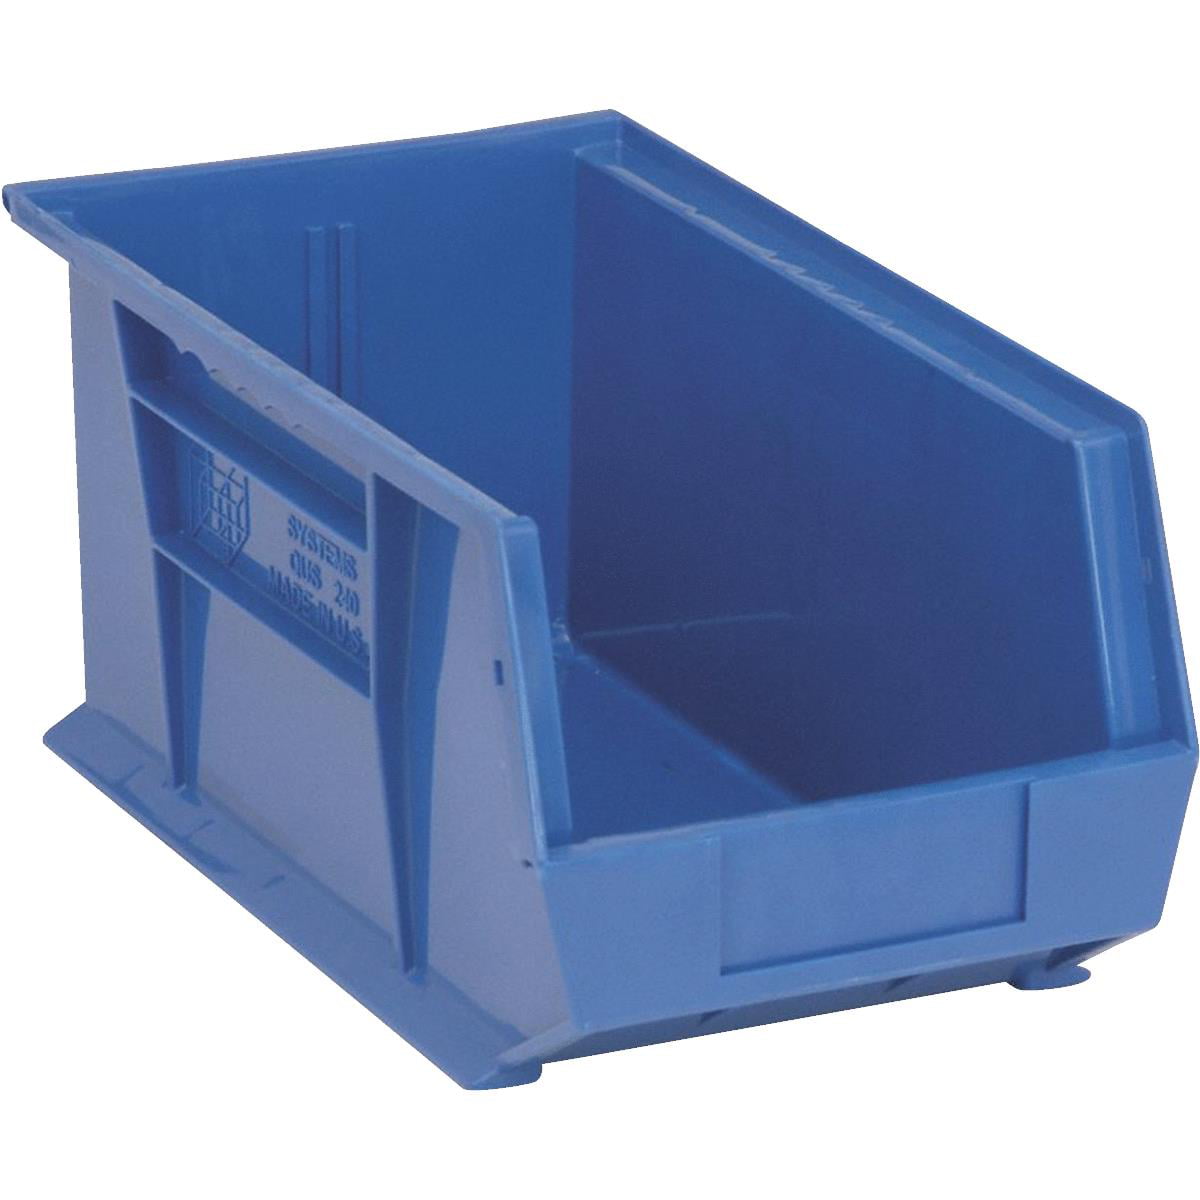 Details about   AKRO-MILS 30224YELLO Hang/Stack Bin,10-7/8 x 4-1/8 x 4 Yel 